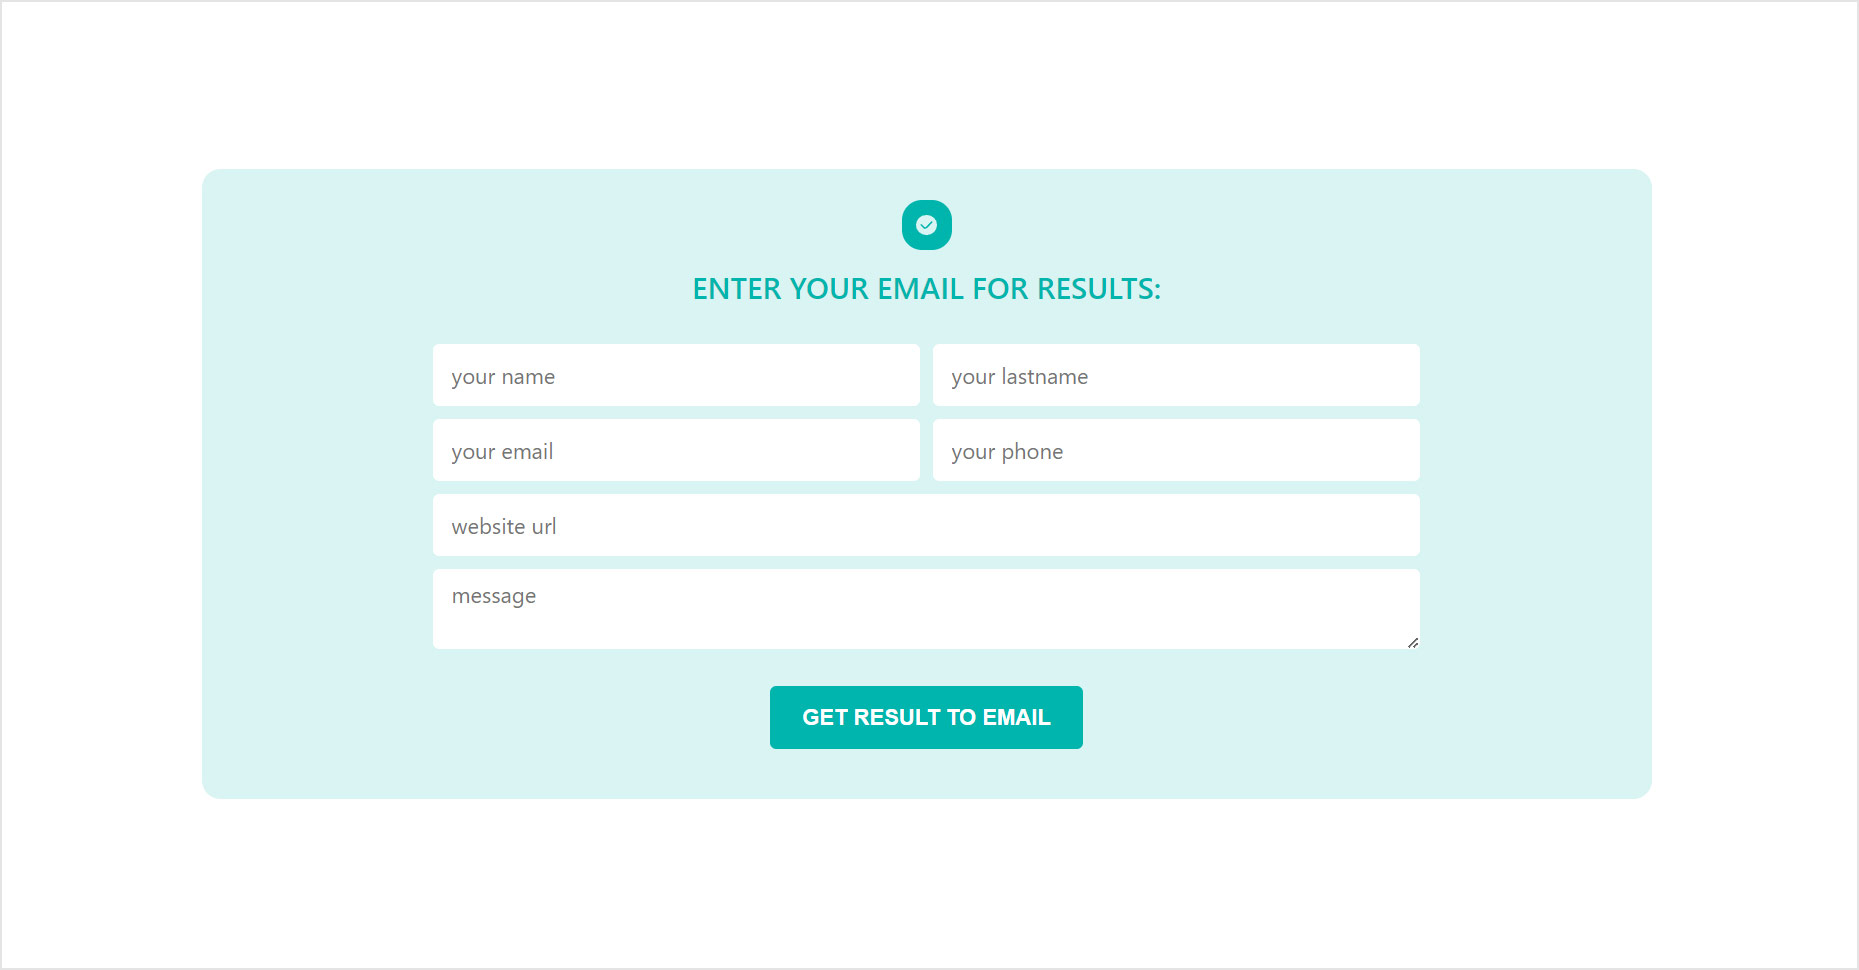 select send to email for users to receive the results via email